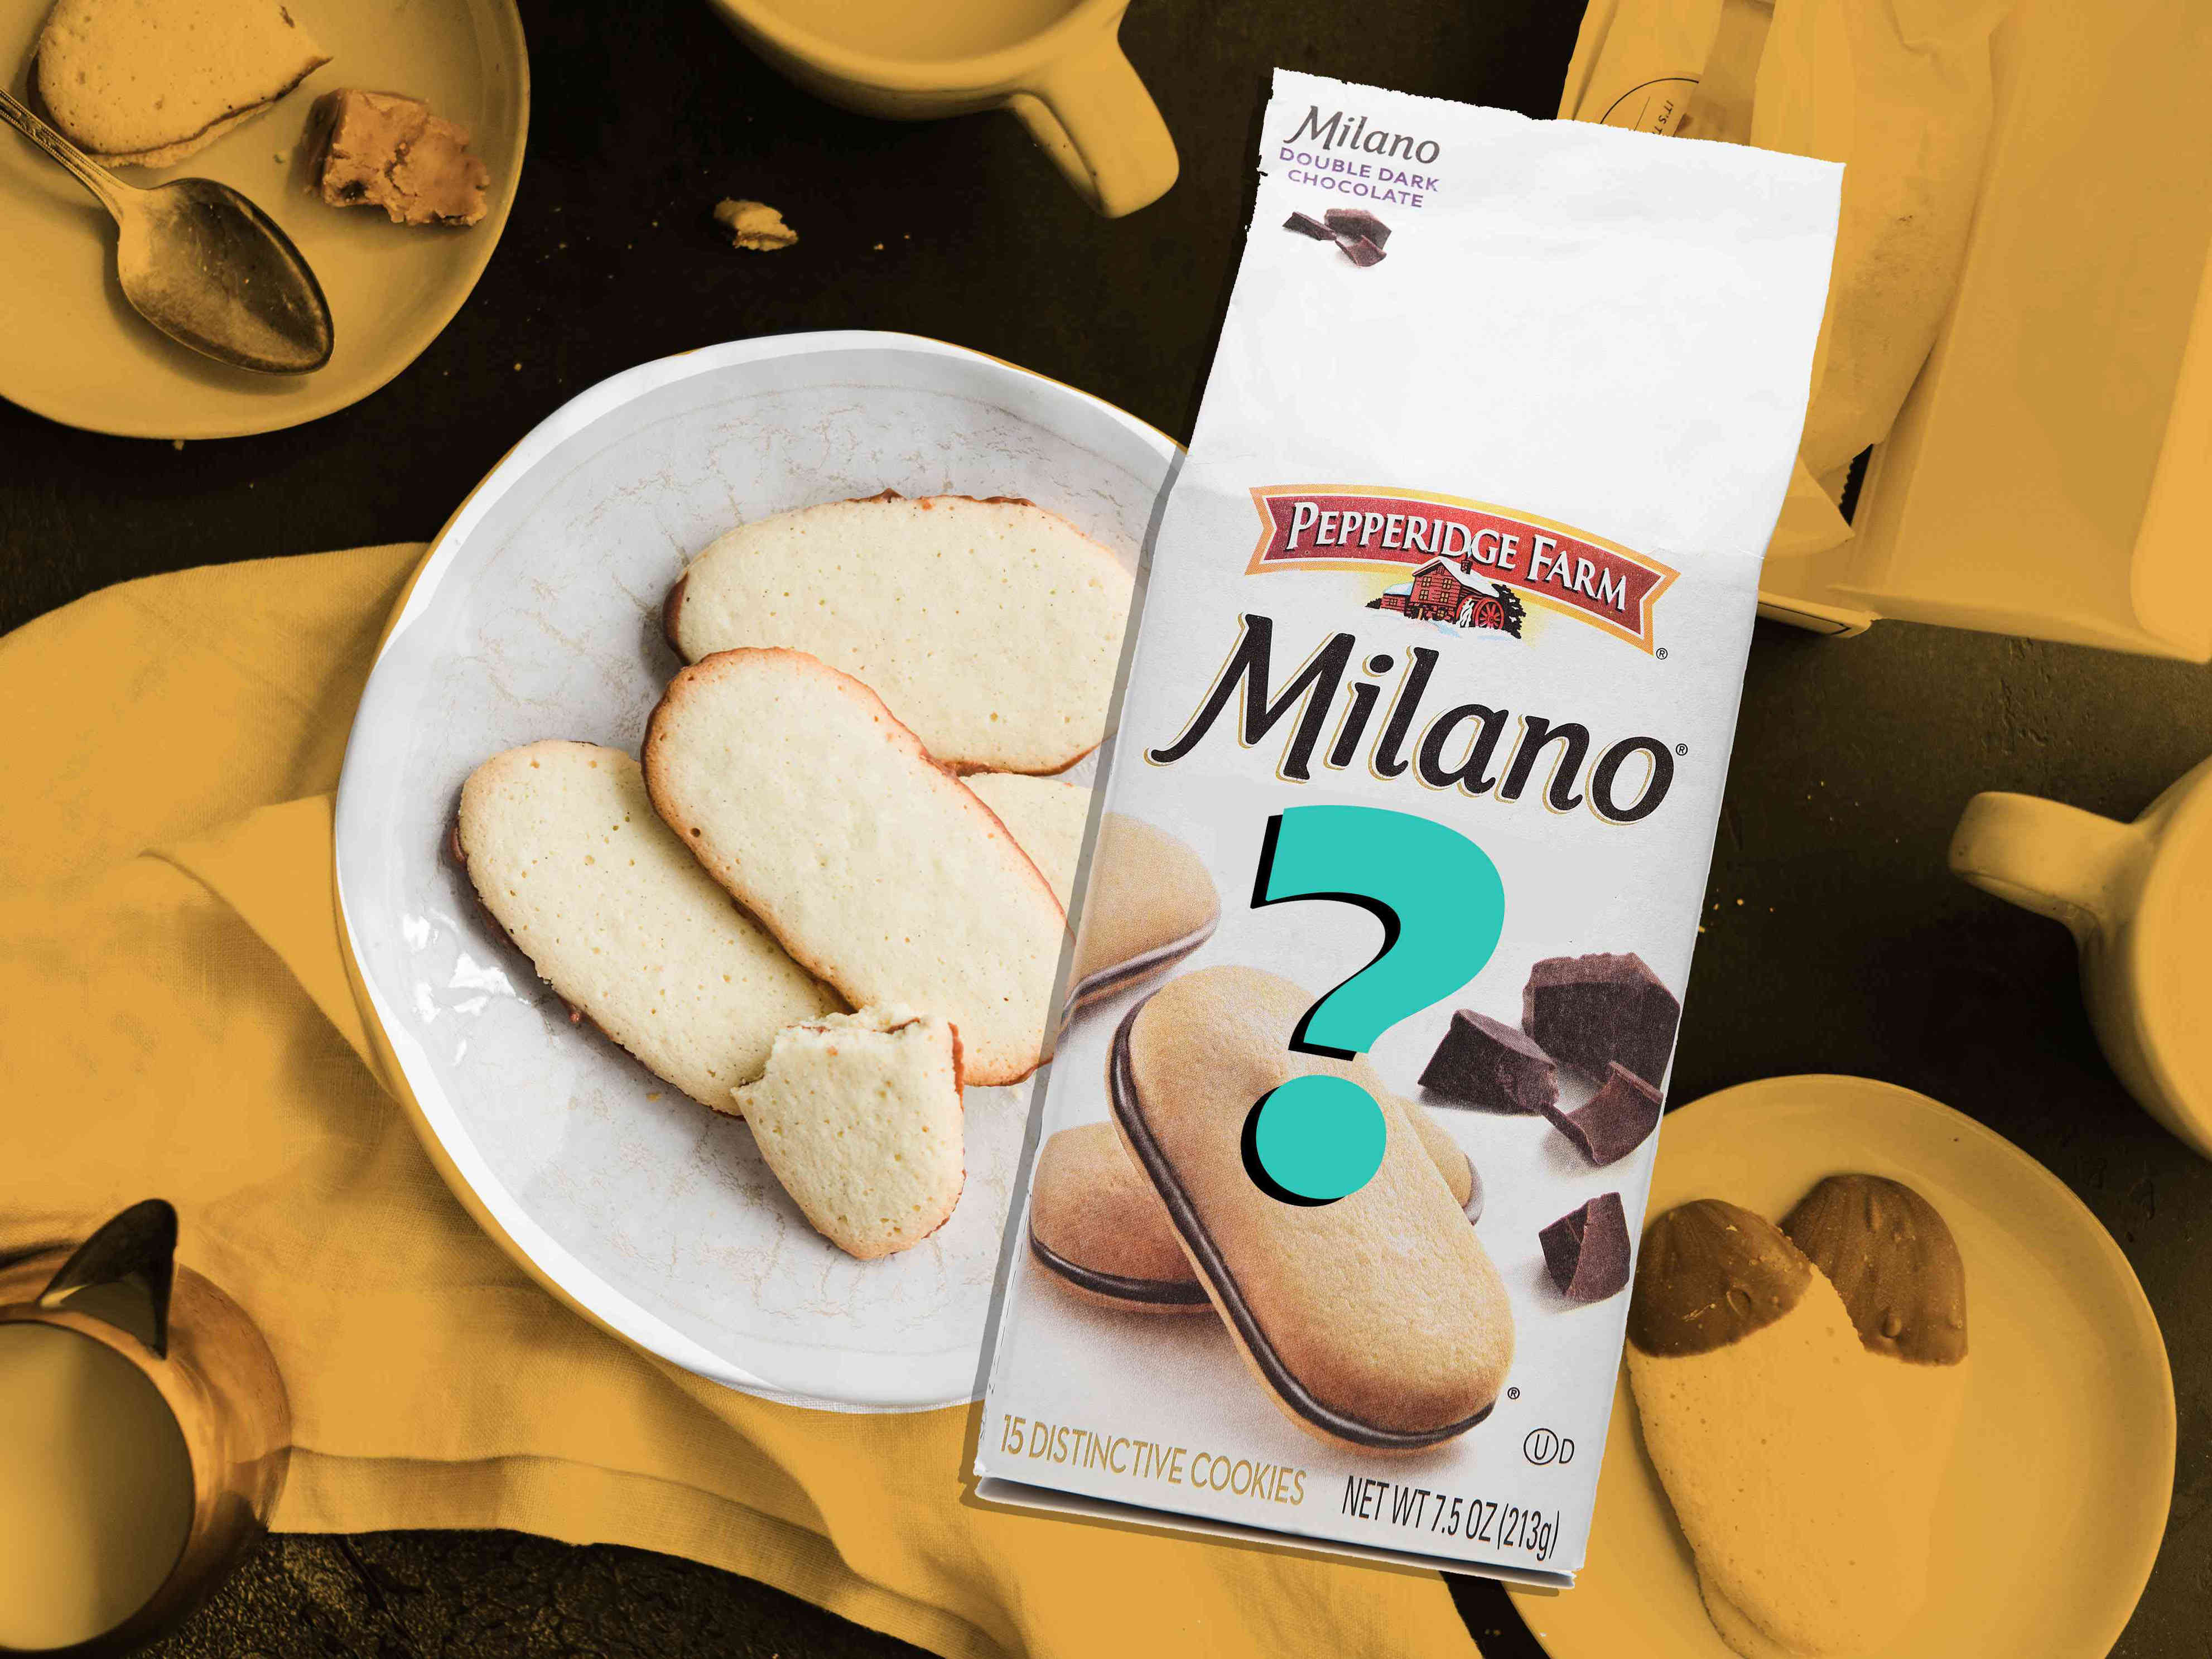 milano is releasing a new cookie for the first time in 2 years